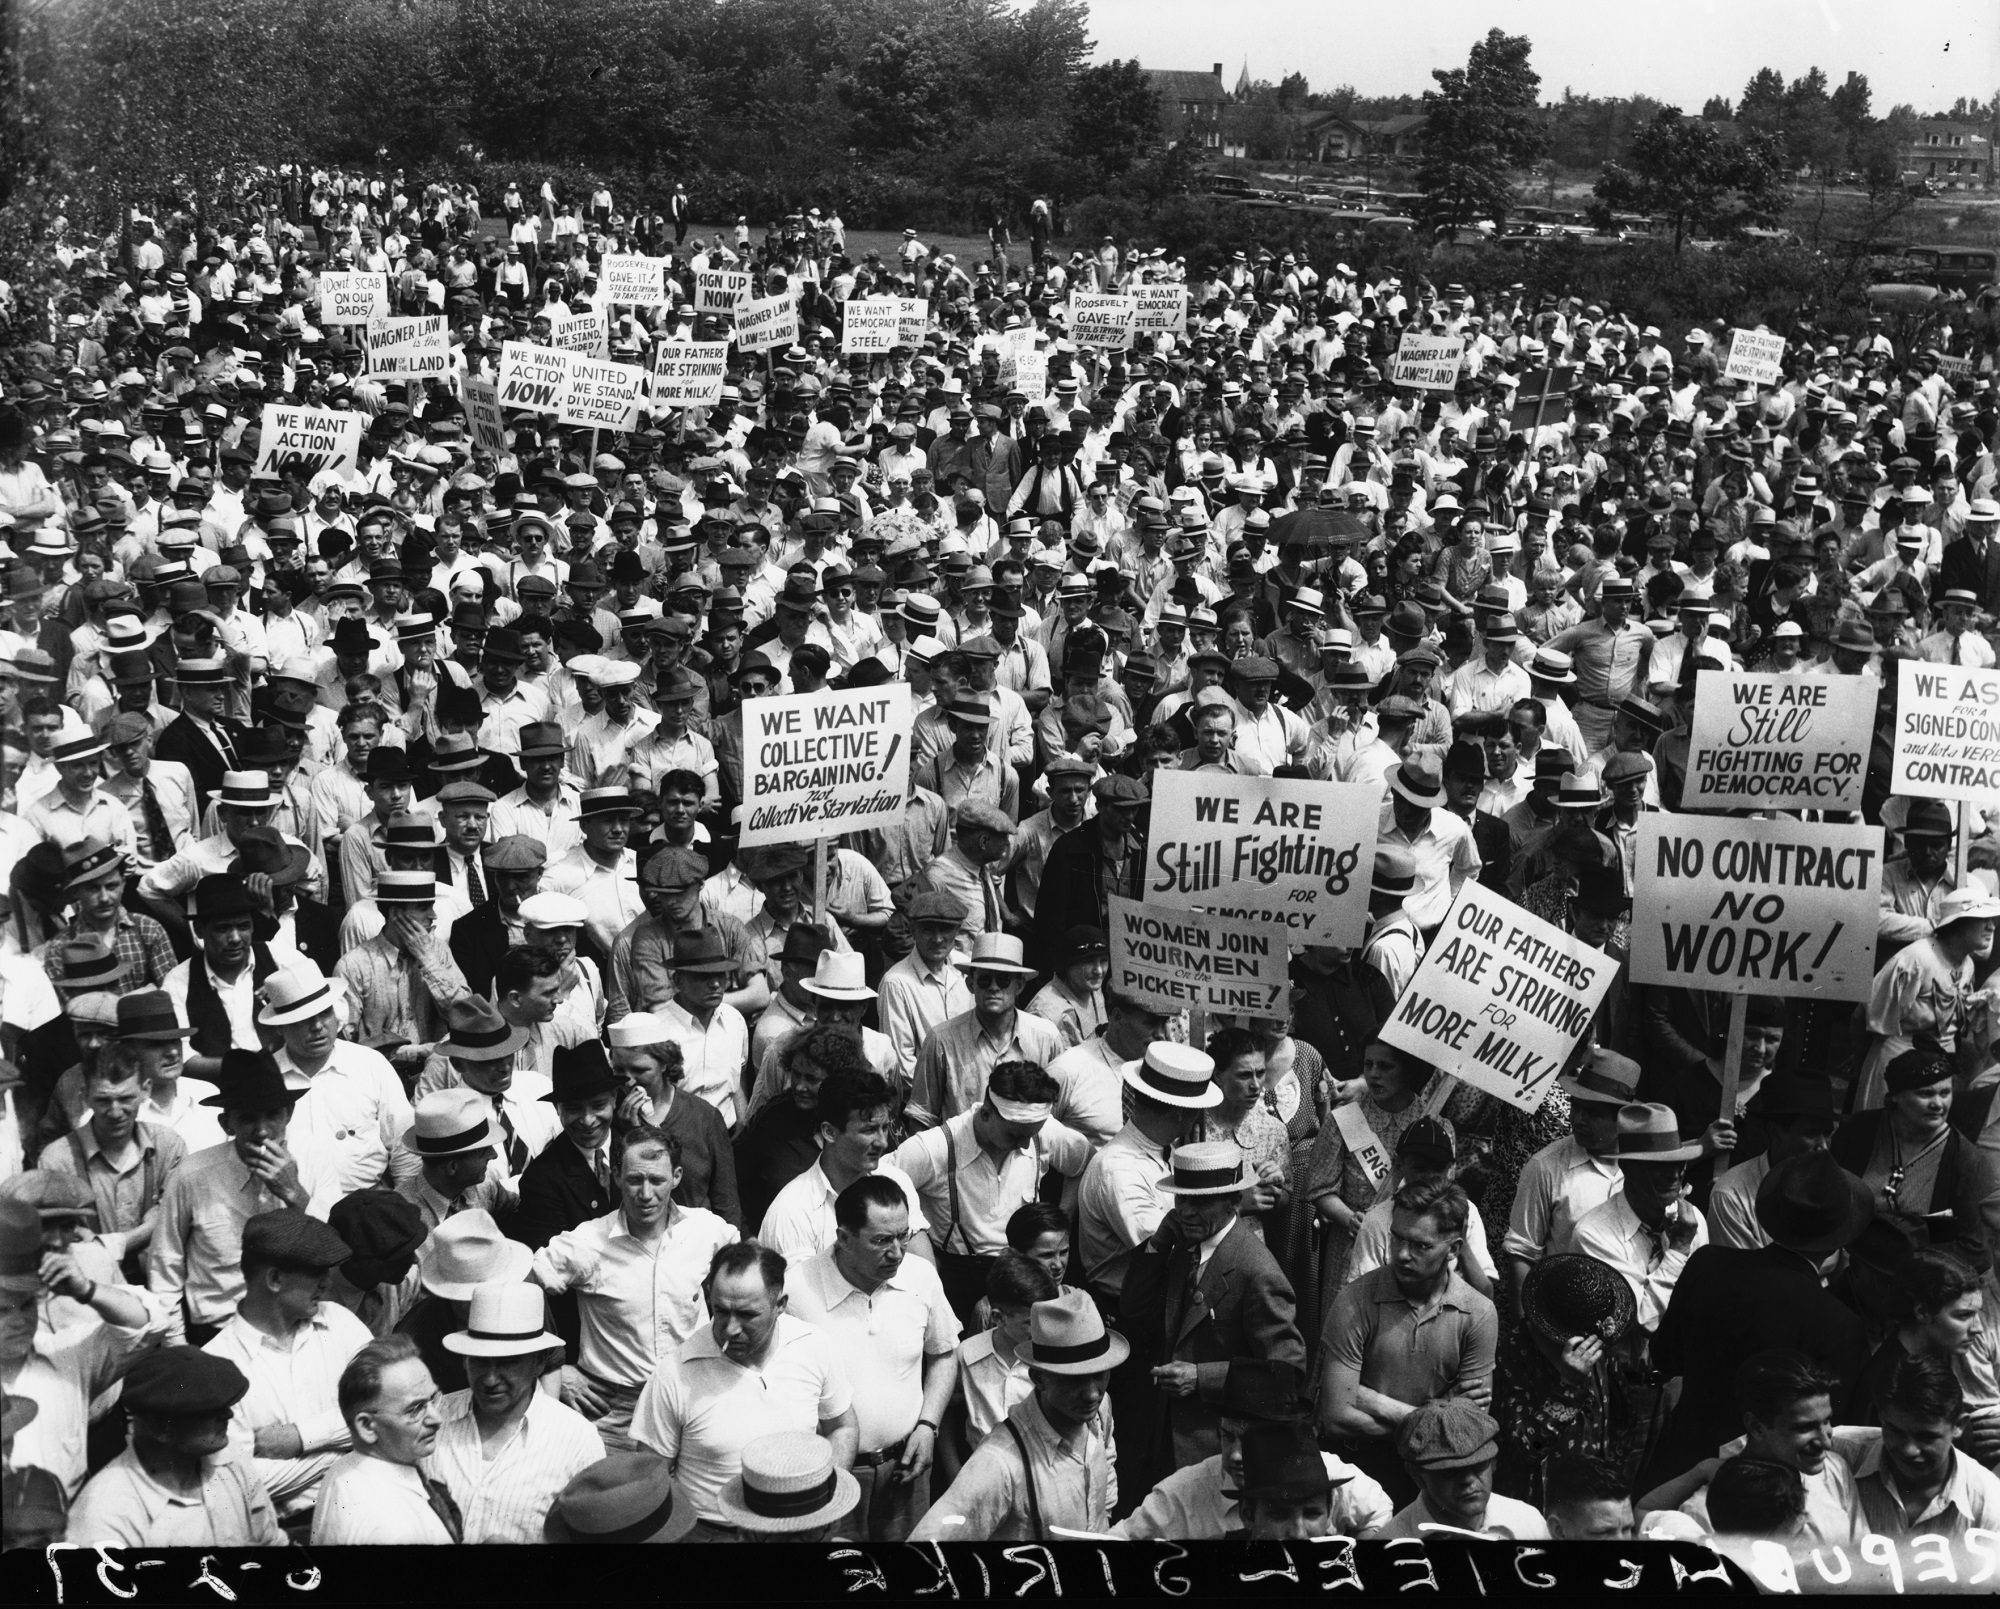 Strikers and sympathizers gather at Republic Steel rally, Chicago, Illinois, June 2, 1937.